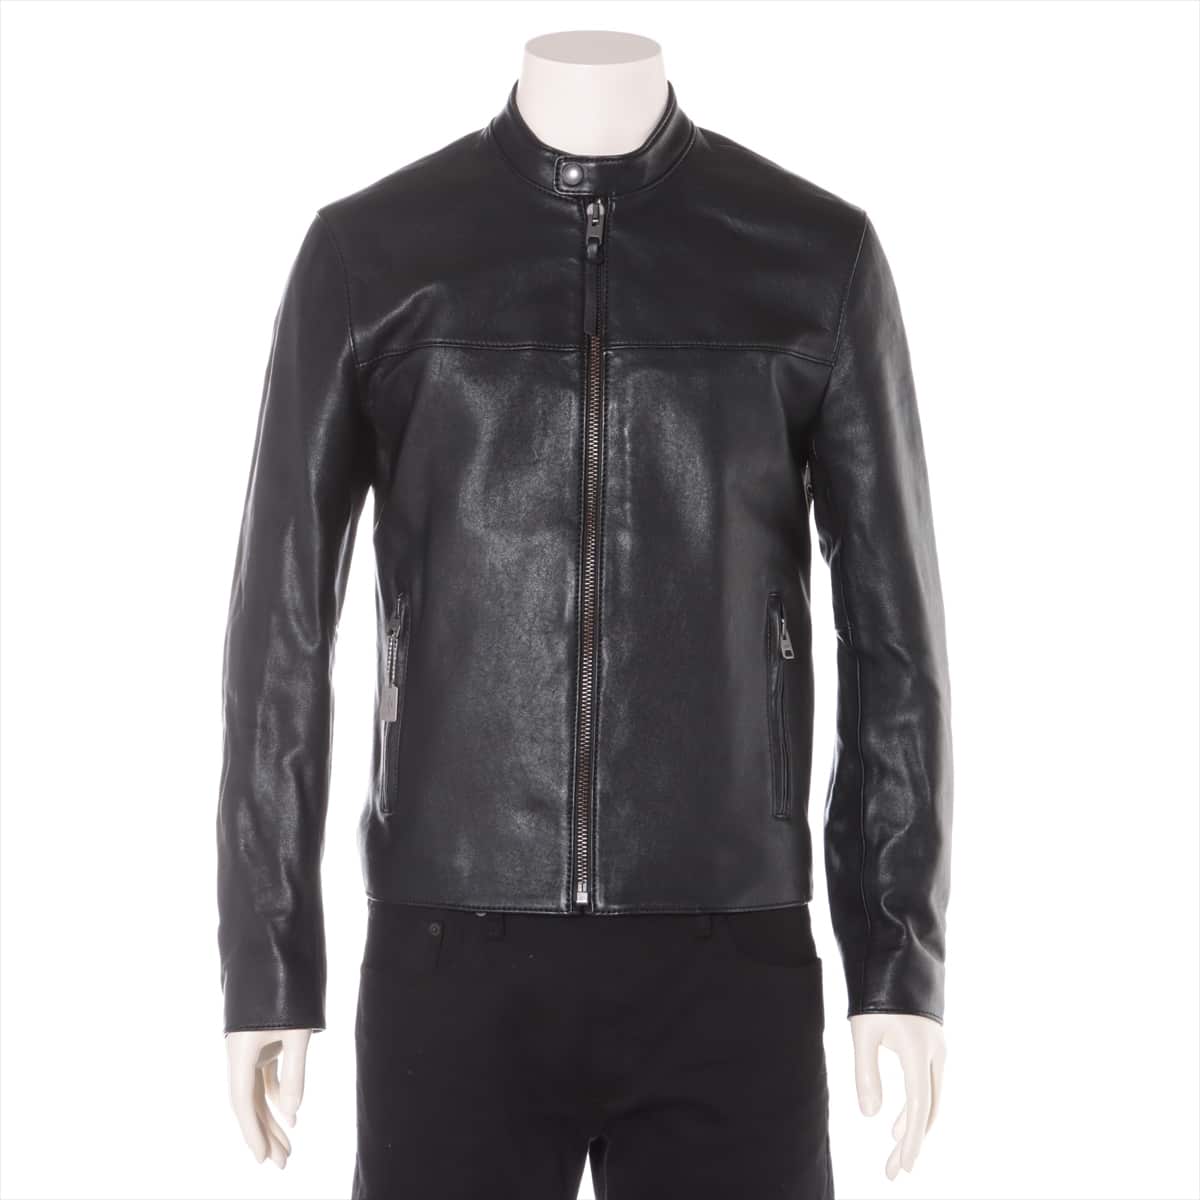 COACH Leather Leather jacket S Men's Black  132154 Single riders